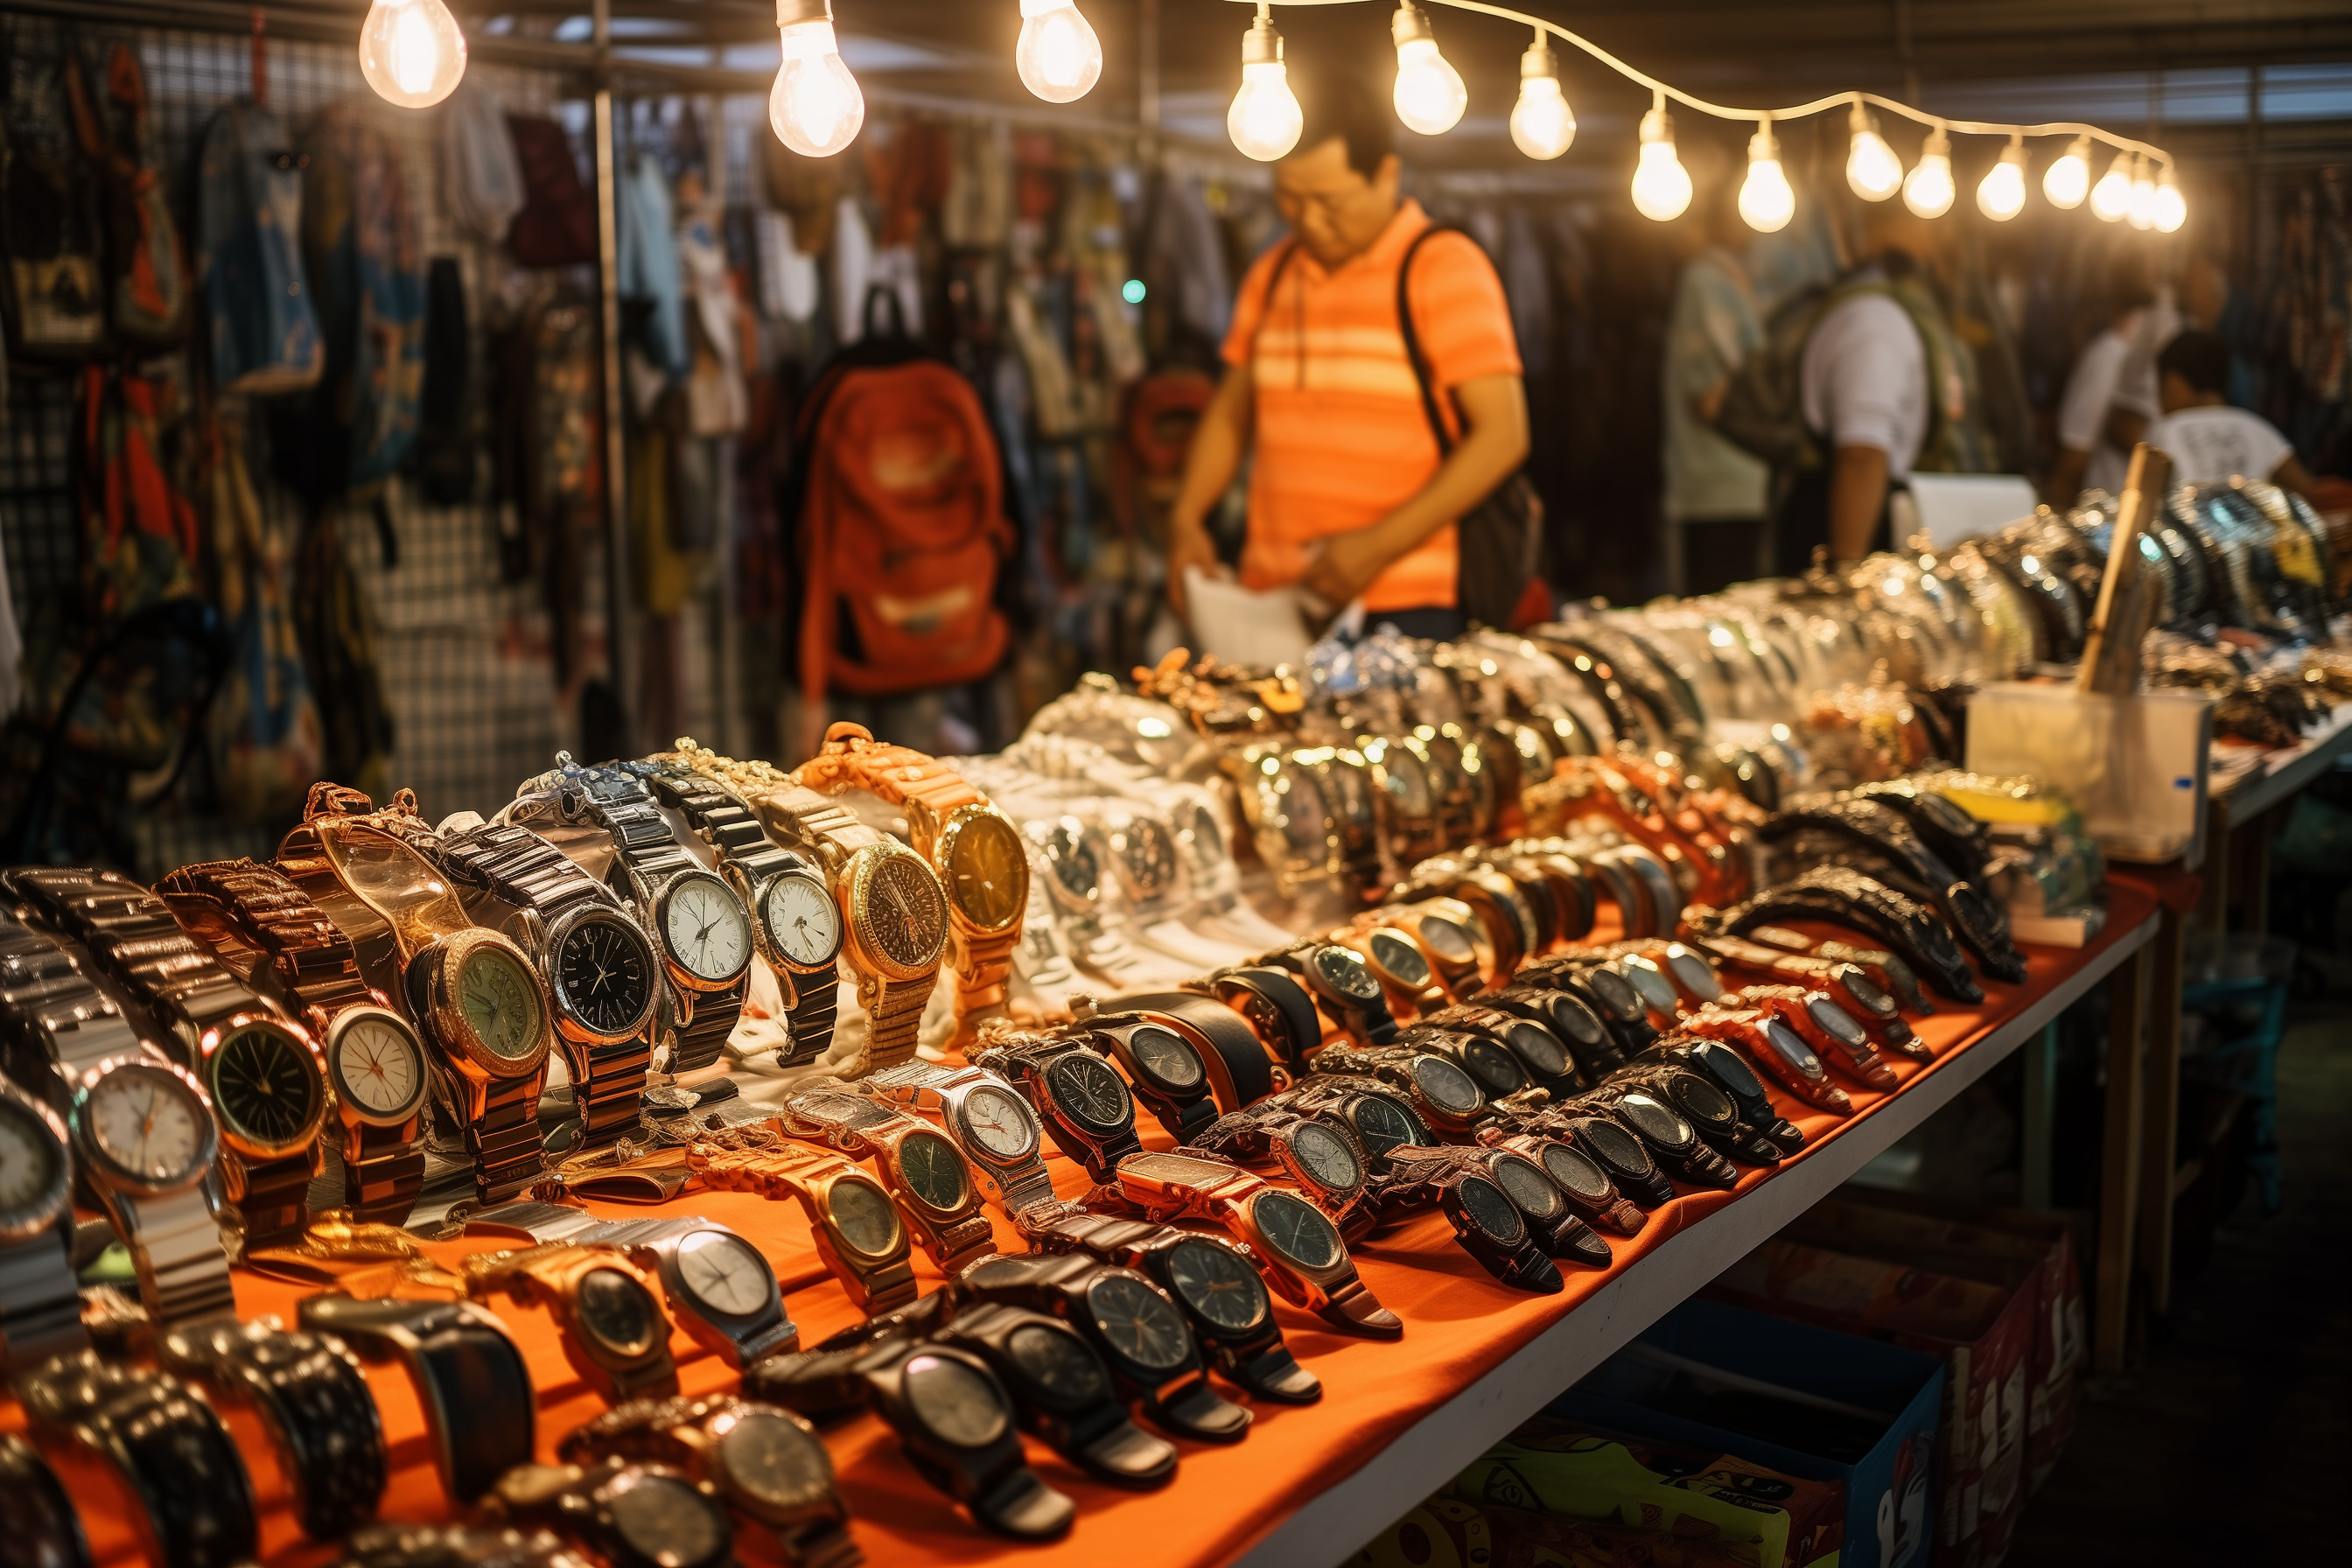 Night market stall selling watches and clothing in Hua Hin